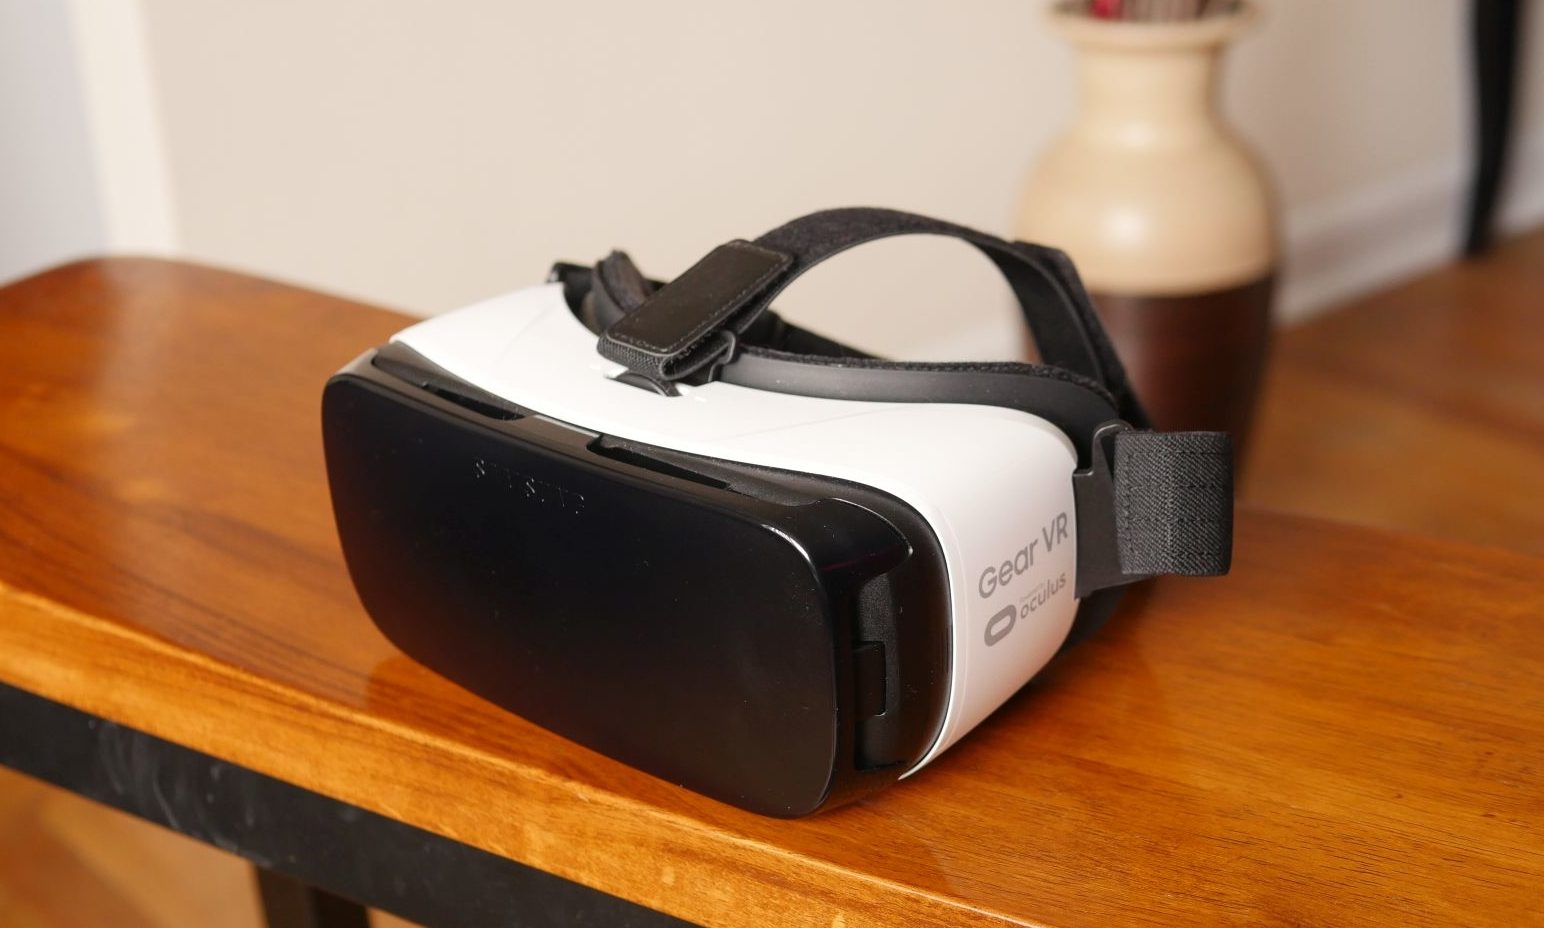 Samsung Gear VR - everything you need to know